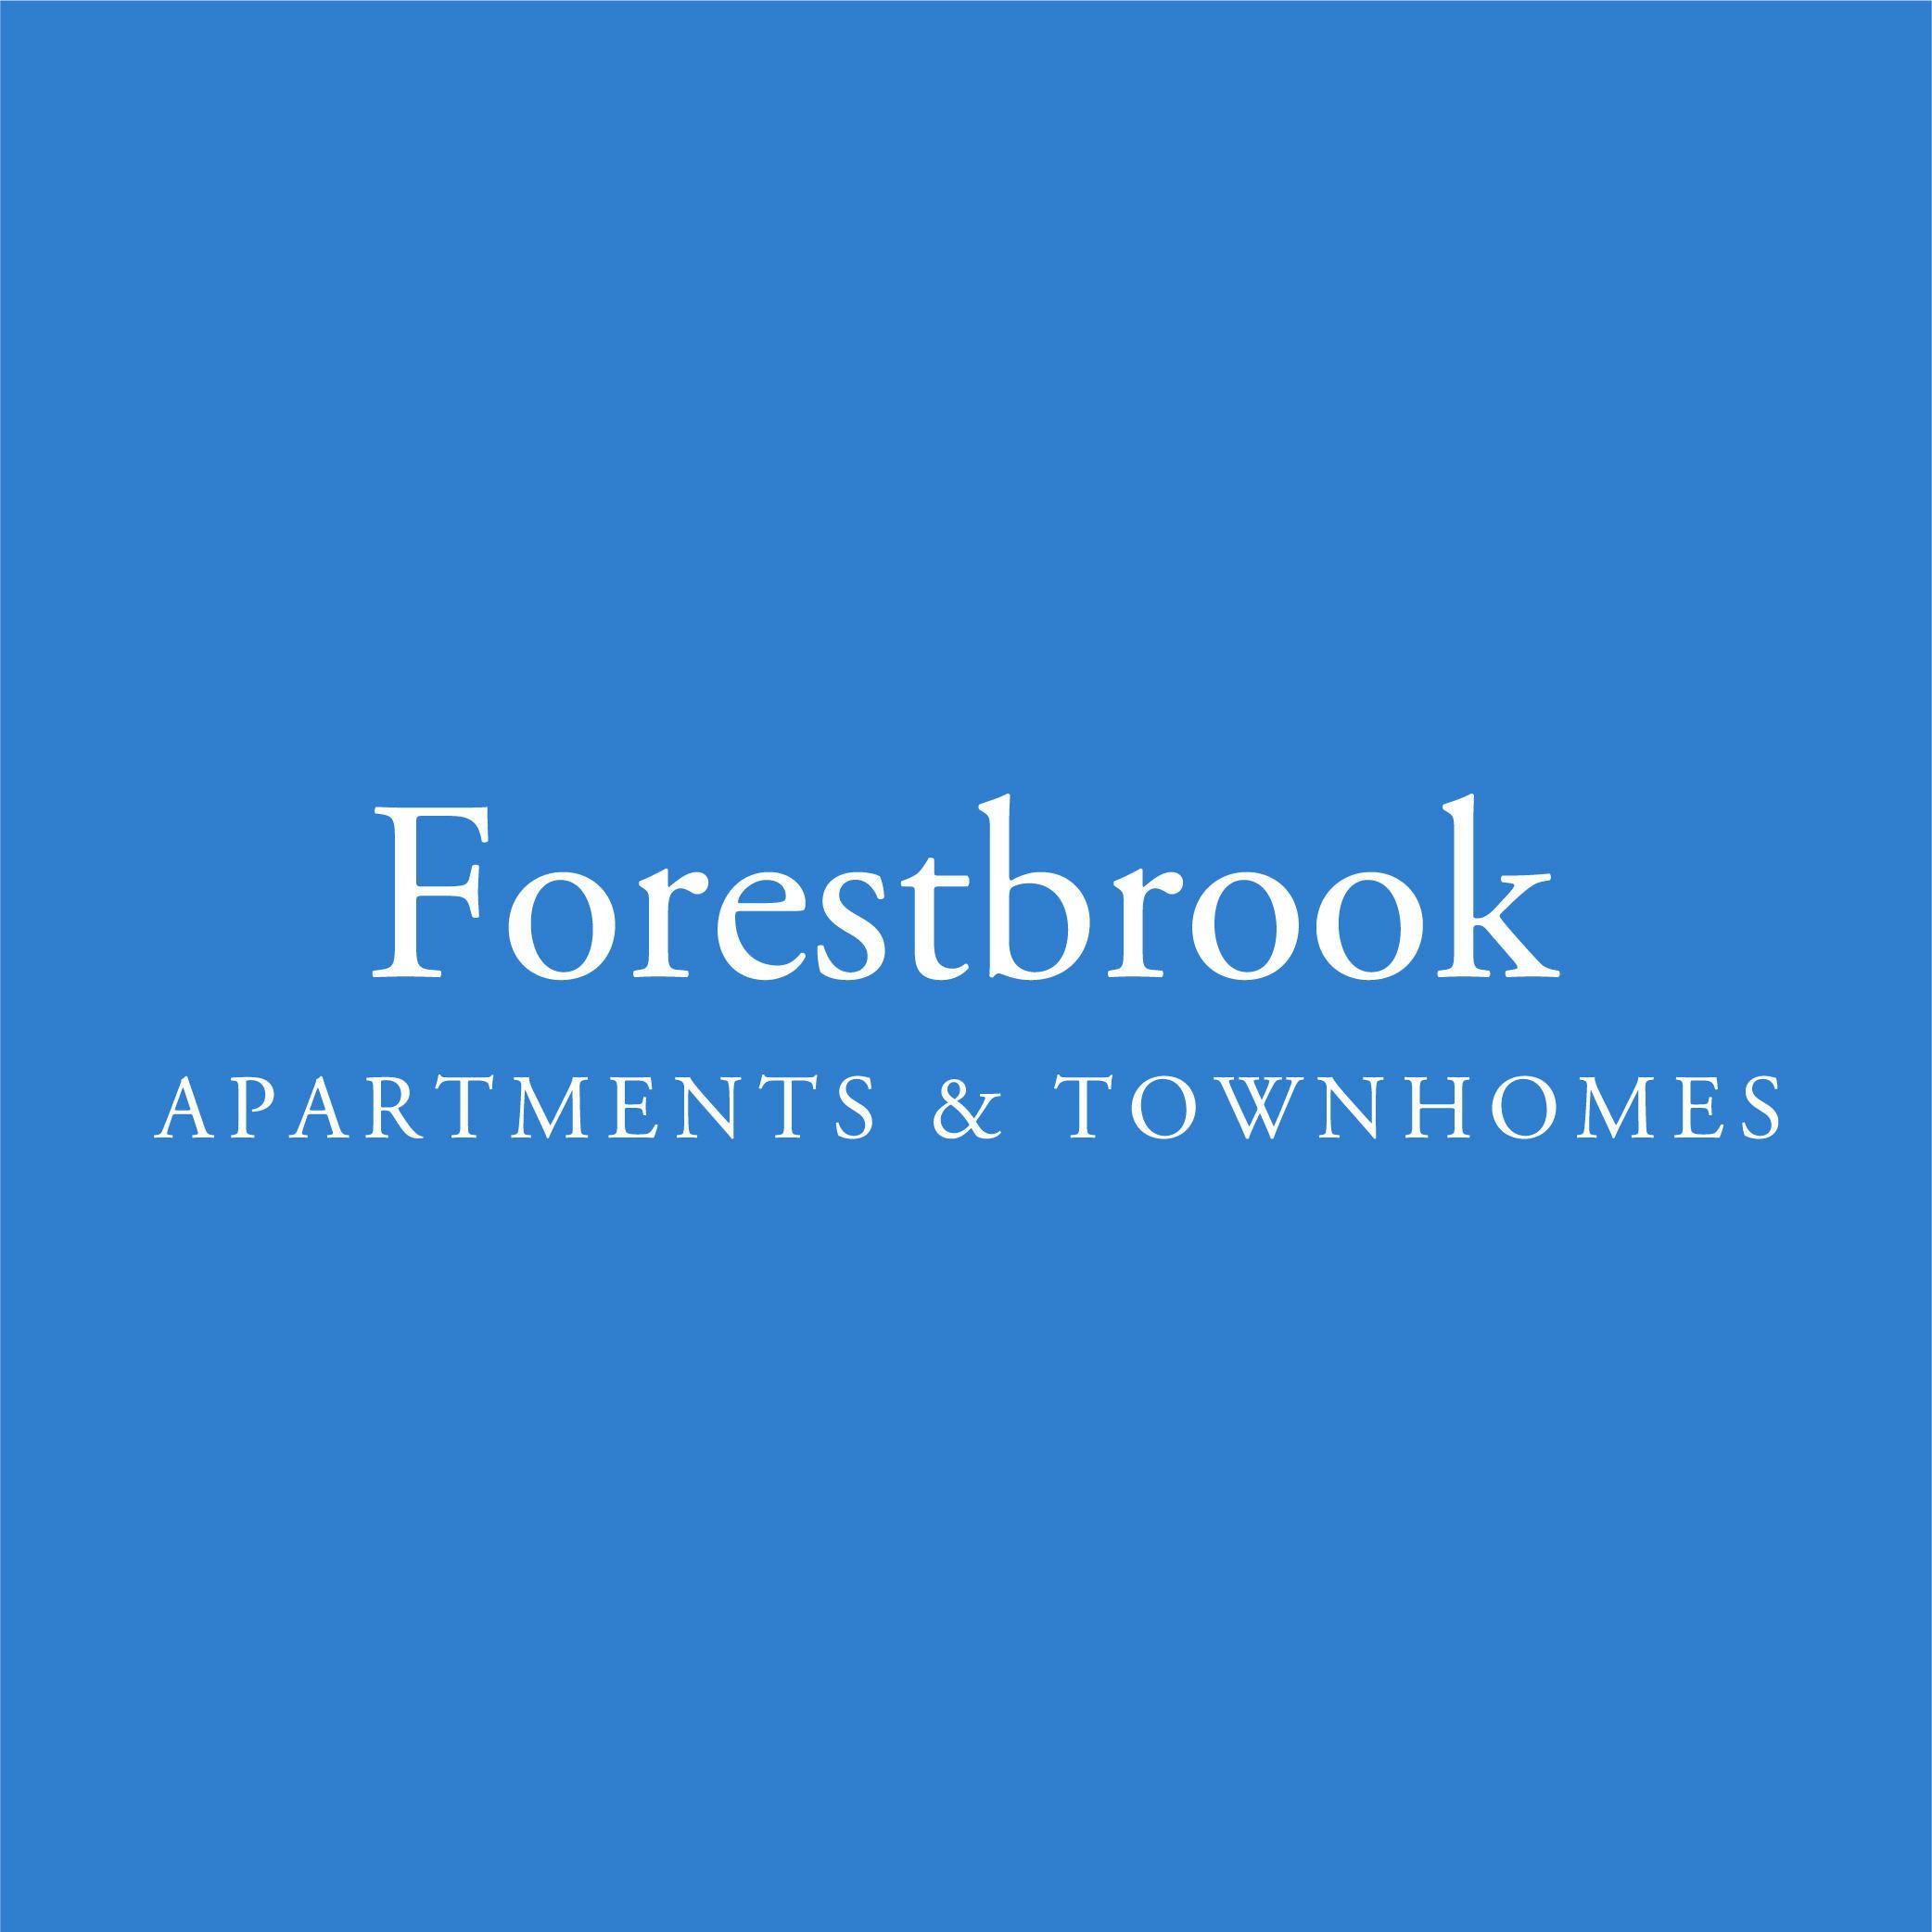 Forestbrook Apartments & Townhomes